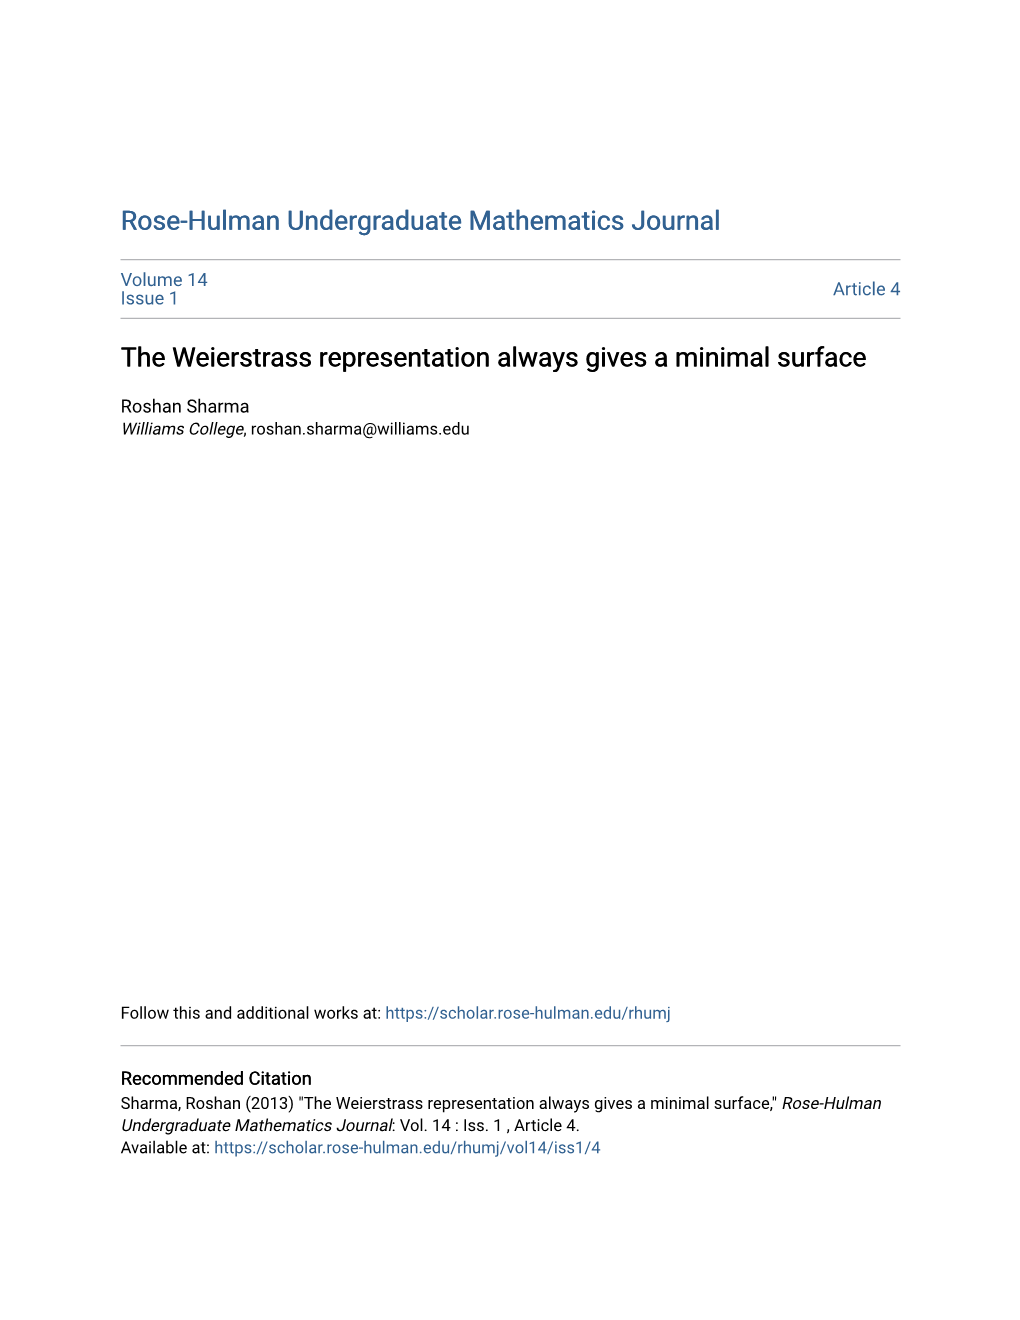 The Weierstrass Representation Always Gives a Minimal Surface